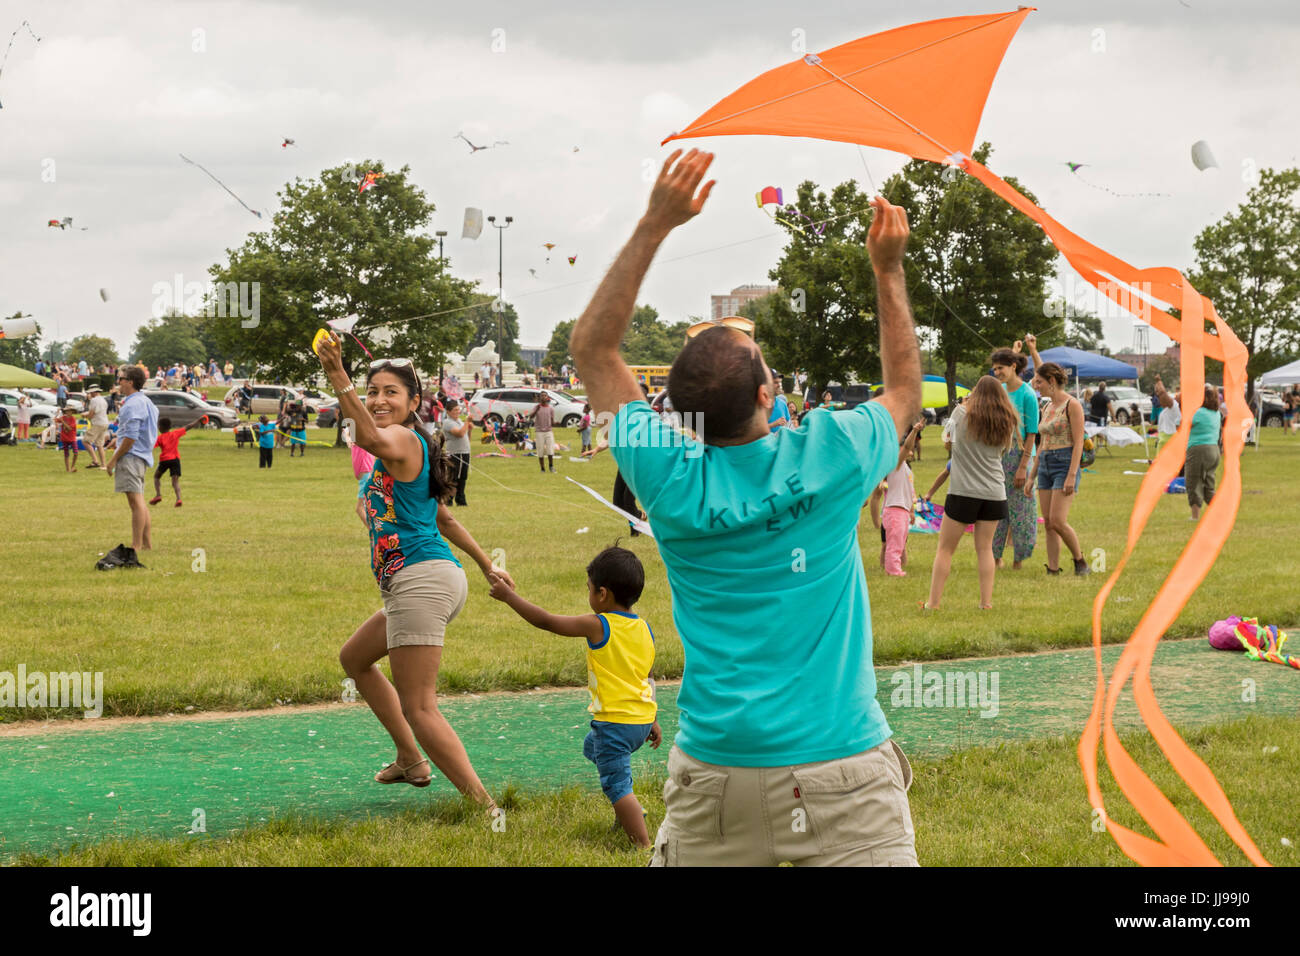 Detroit, Michigan - The Detroit Kite Festival, held on Belle Isle. About a thousand children and adults made kites, flew kites, and watched profession Stock Photo